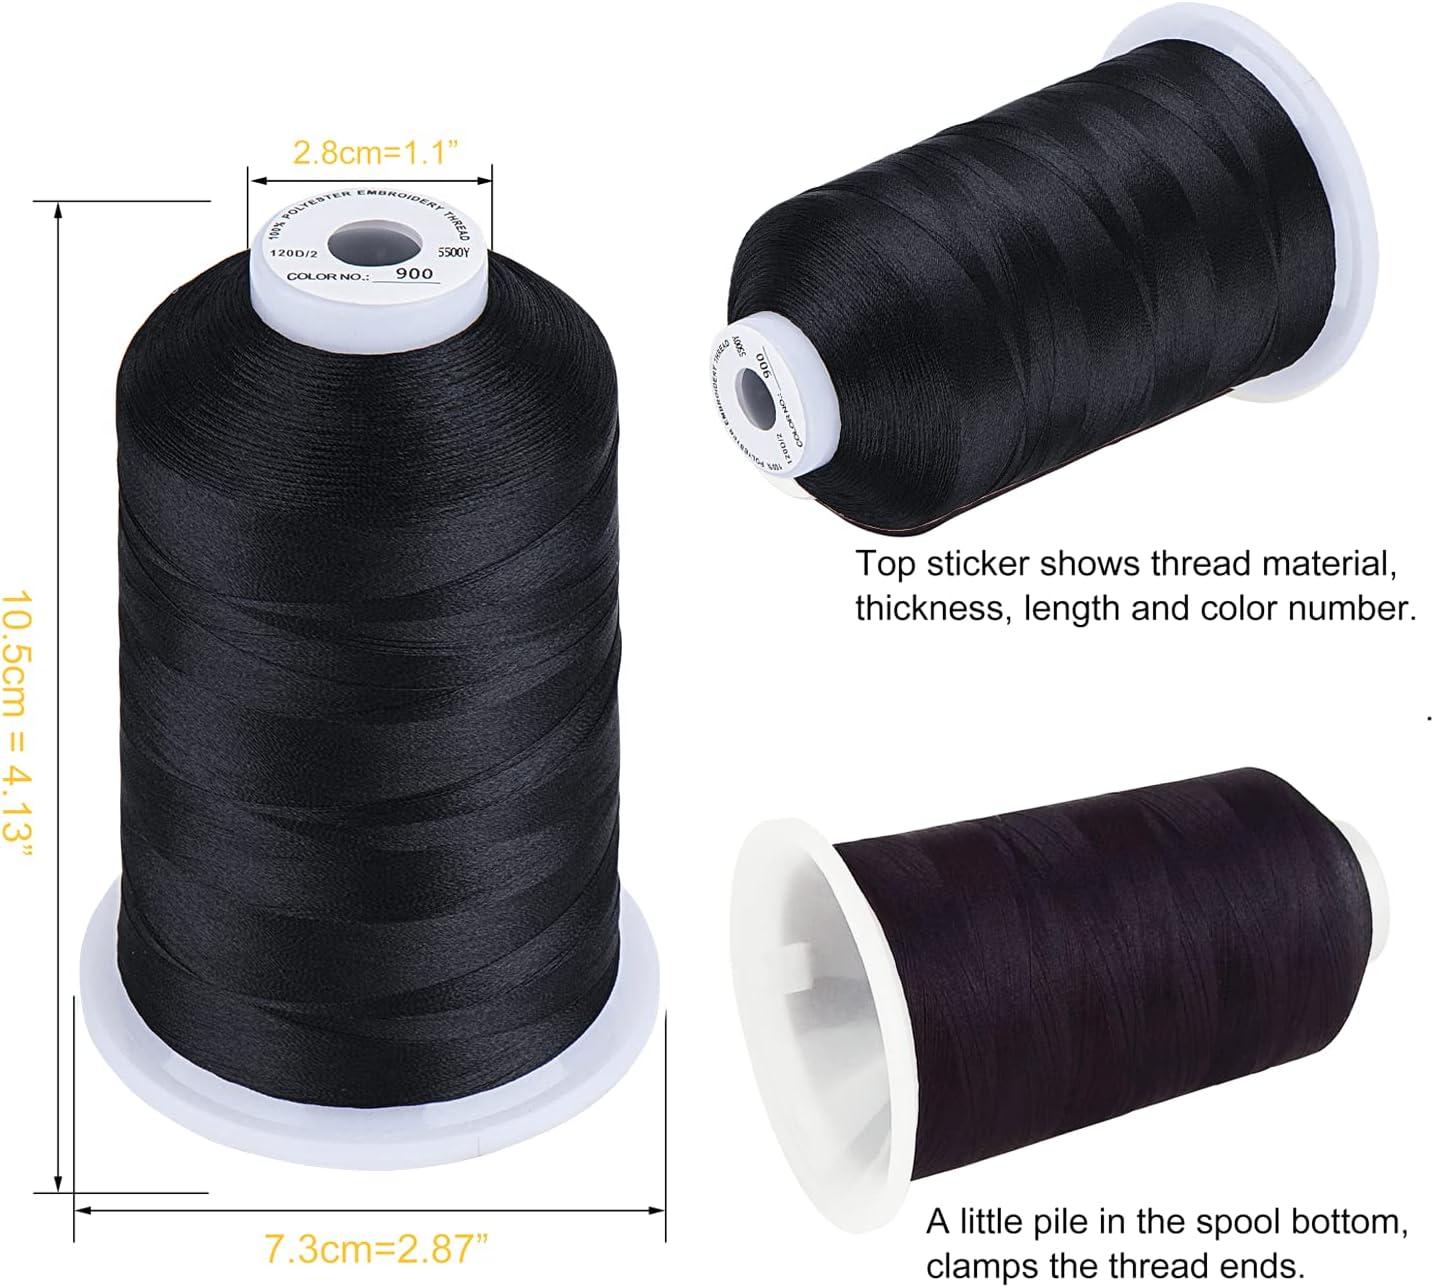 $2/mo - Finance Simthread Brown Embroidery Thread 8 Madeira Colors  550Yards, 40wt 100% Polyester for Brother, Babylock, Janome, Singer, Pfaff,  Husqvarna, Bernina Machine